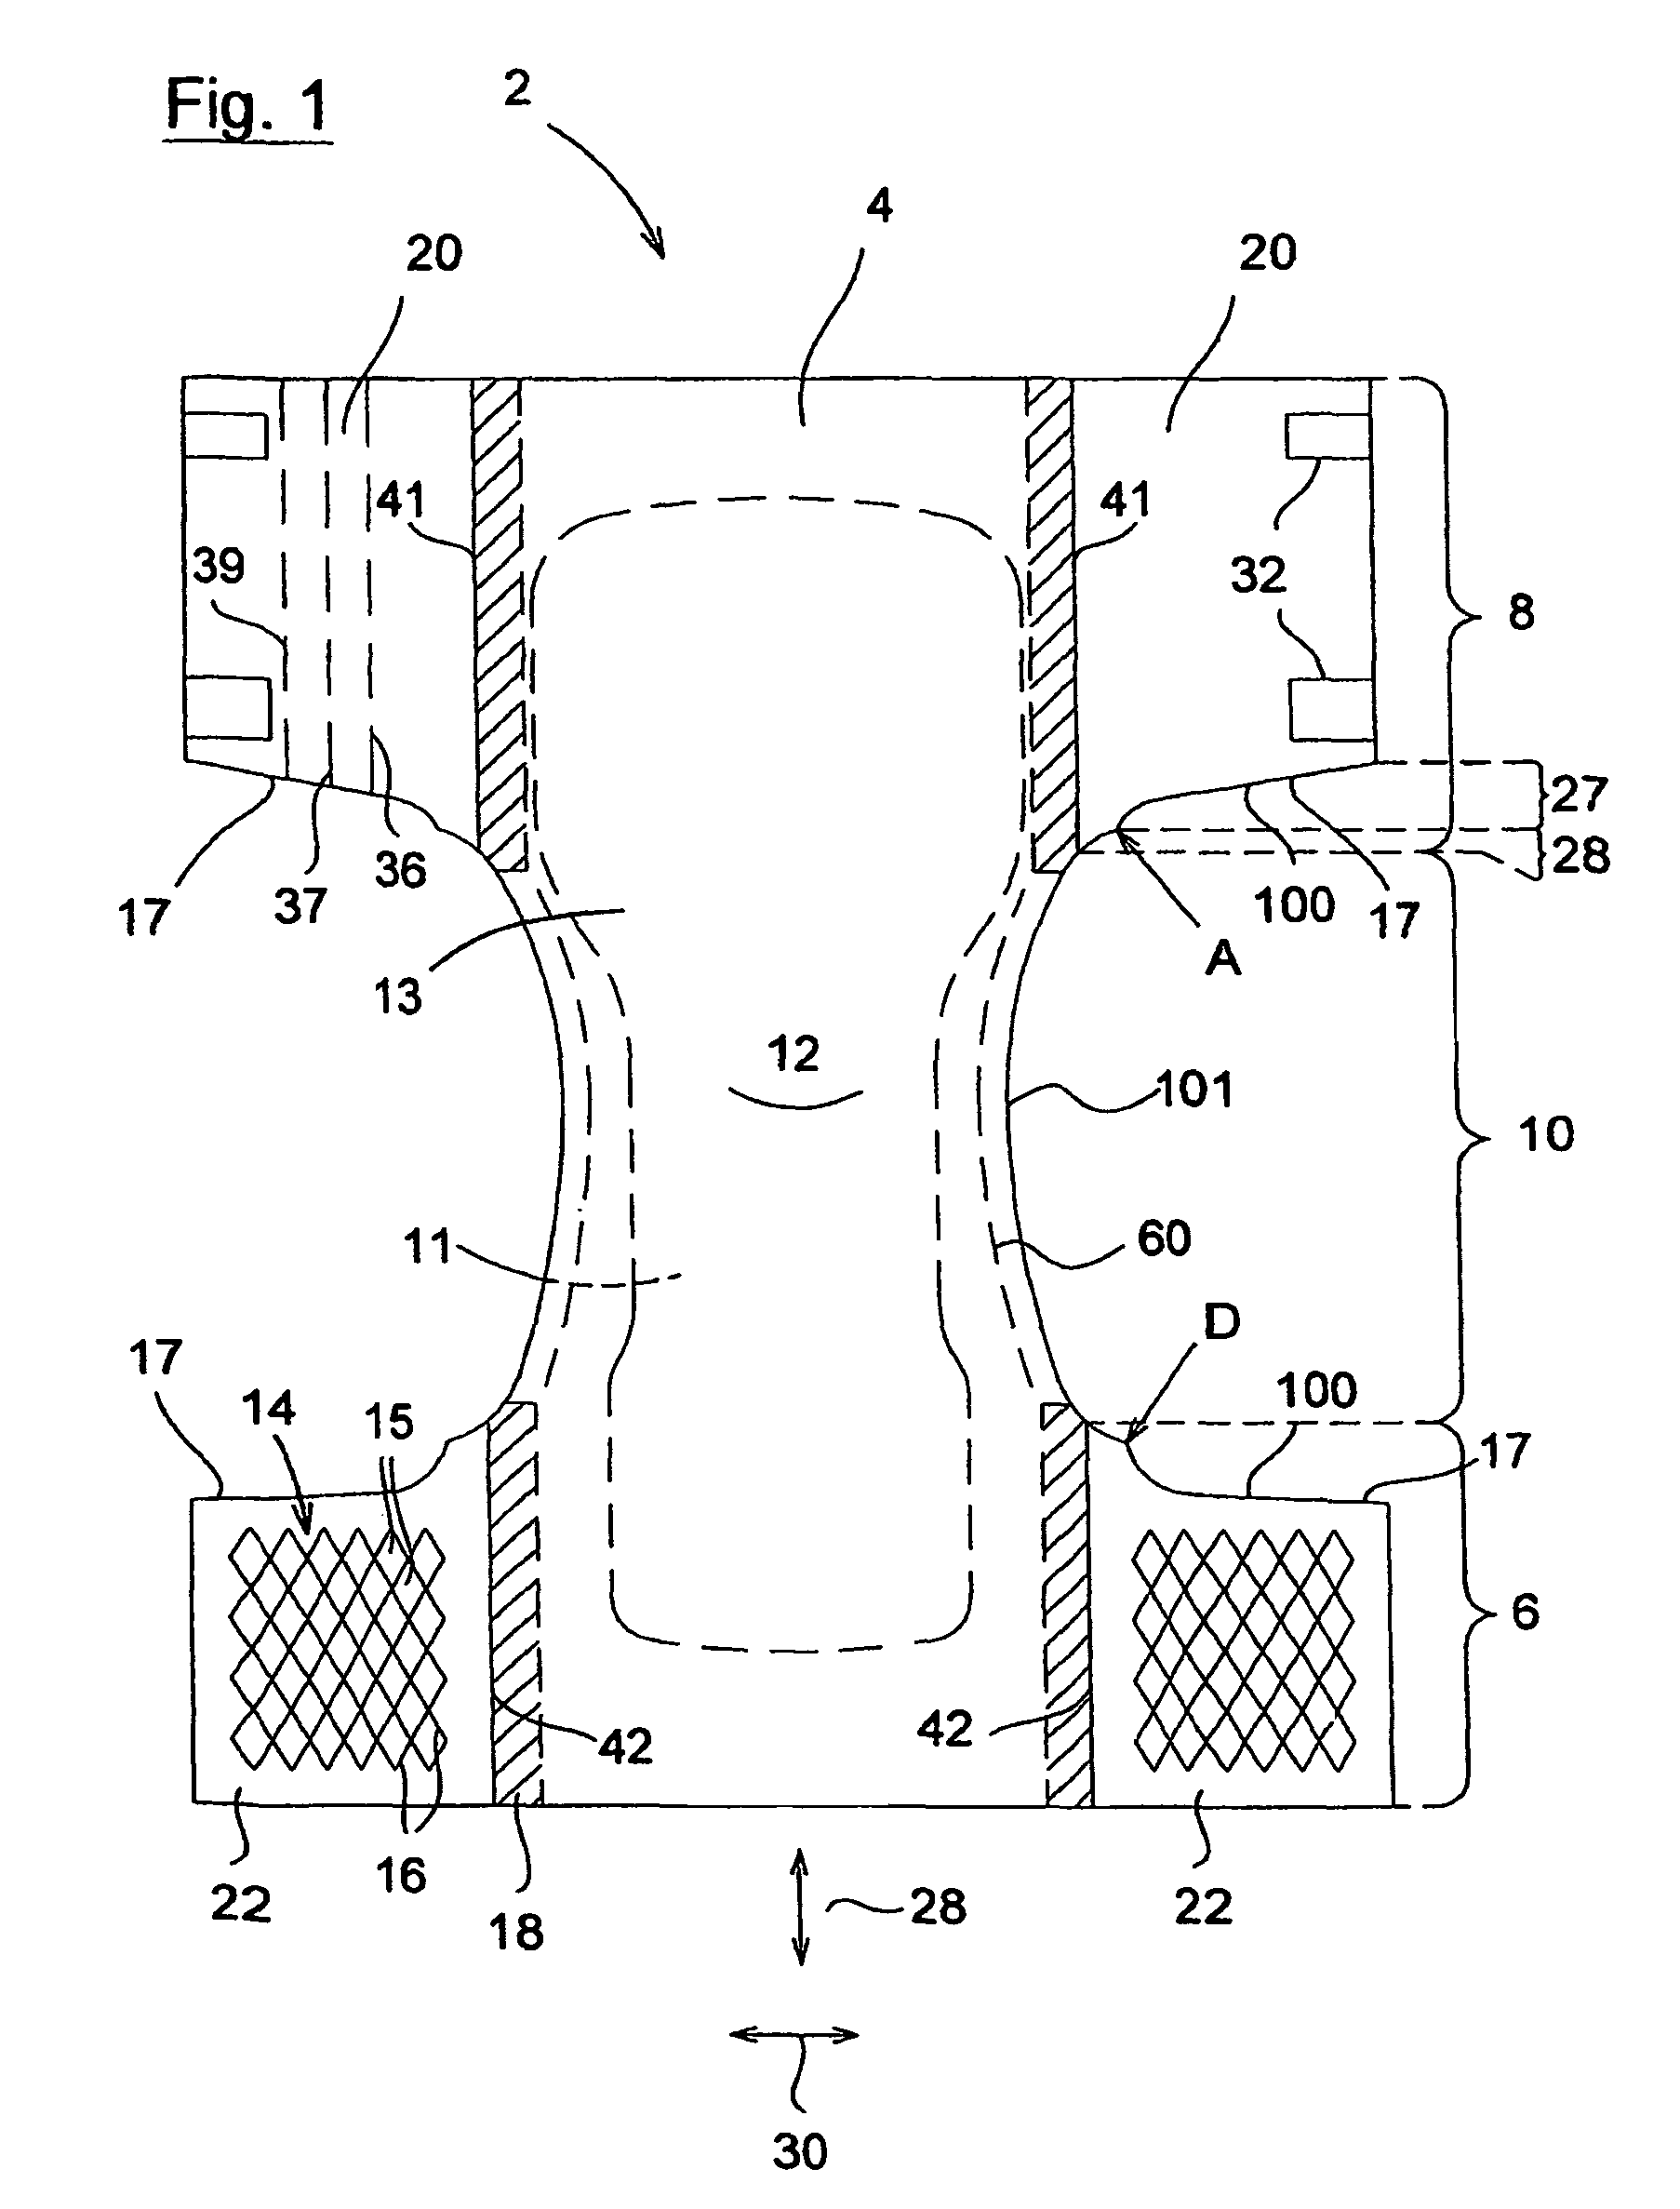 Method of forming an absorbing disposable incontinence diaper